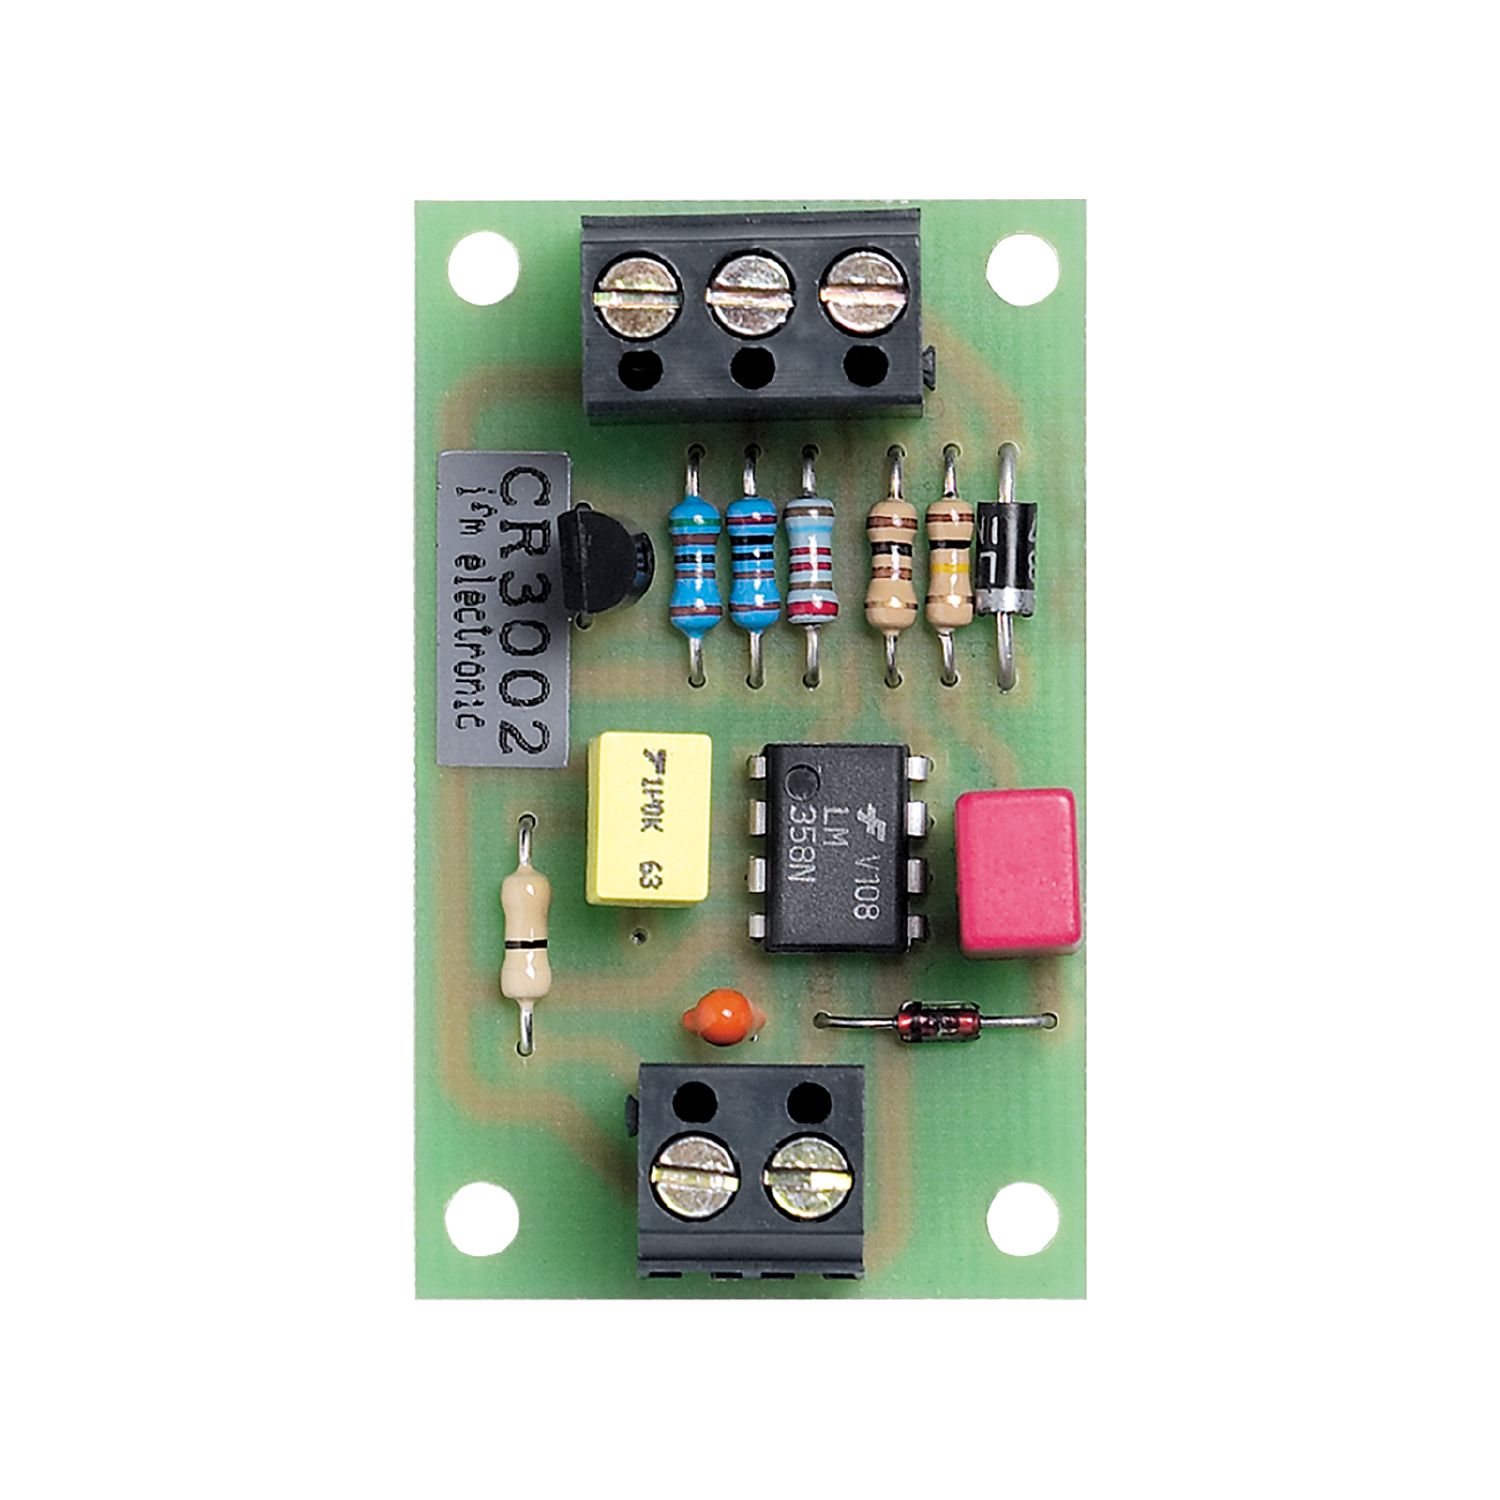 Equivalent Absolute Sow CR3002 - PWM to analog signal converter - ifm